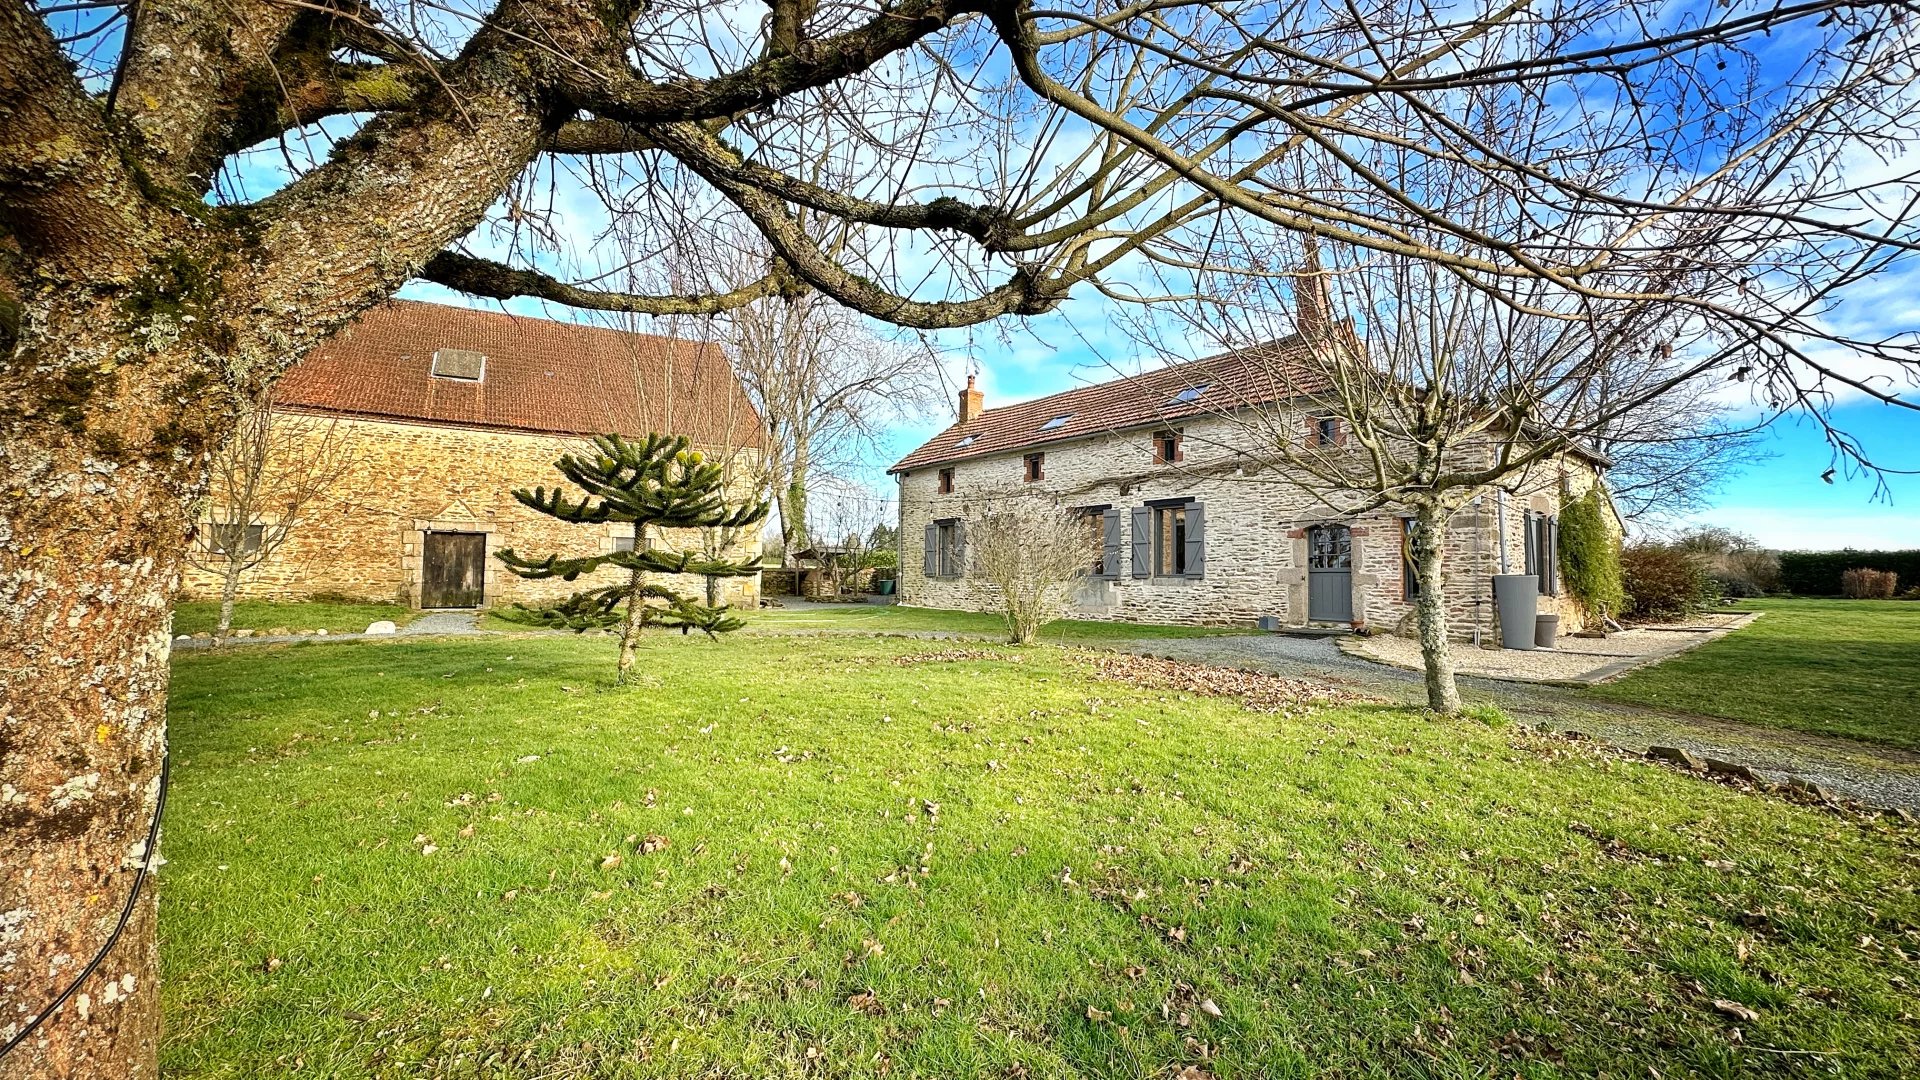 Beautifully renovated property within an enclosed country domain with further potential